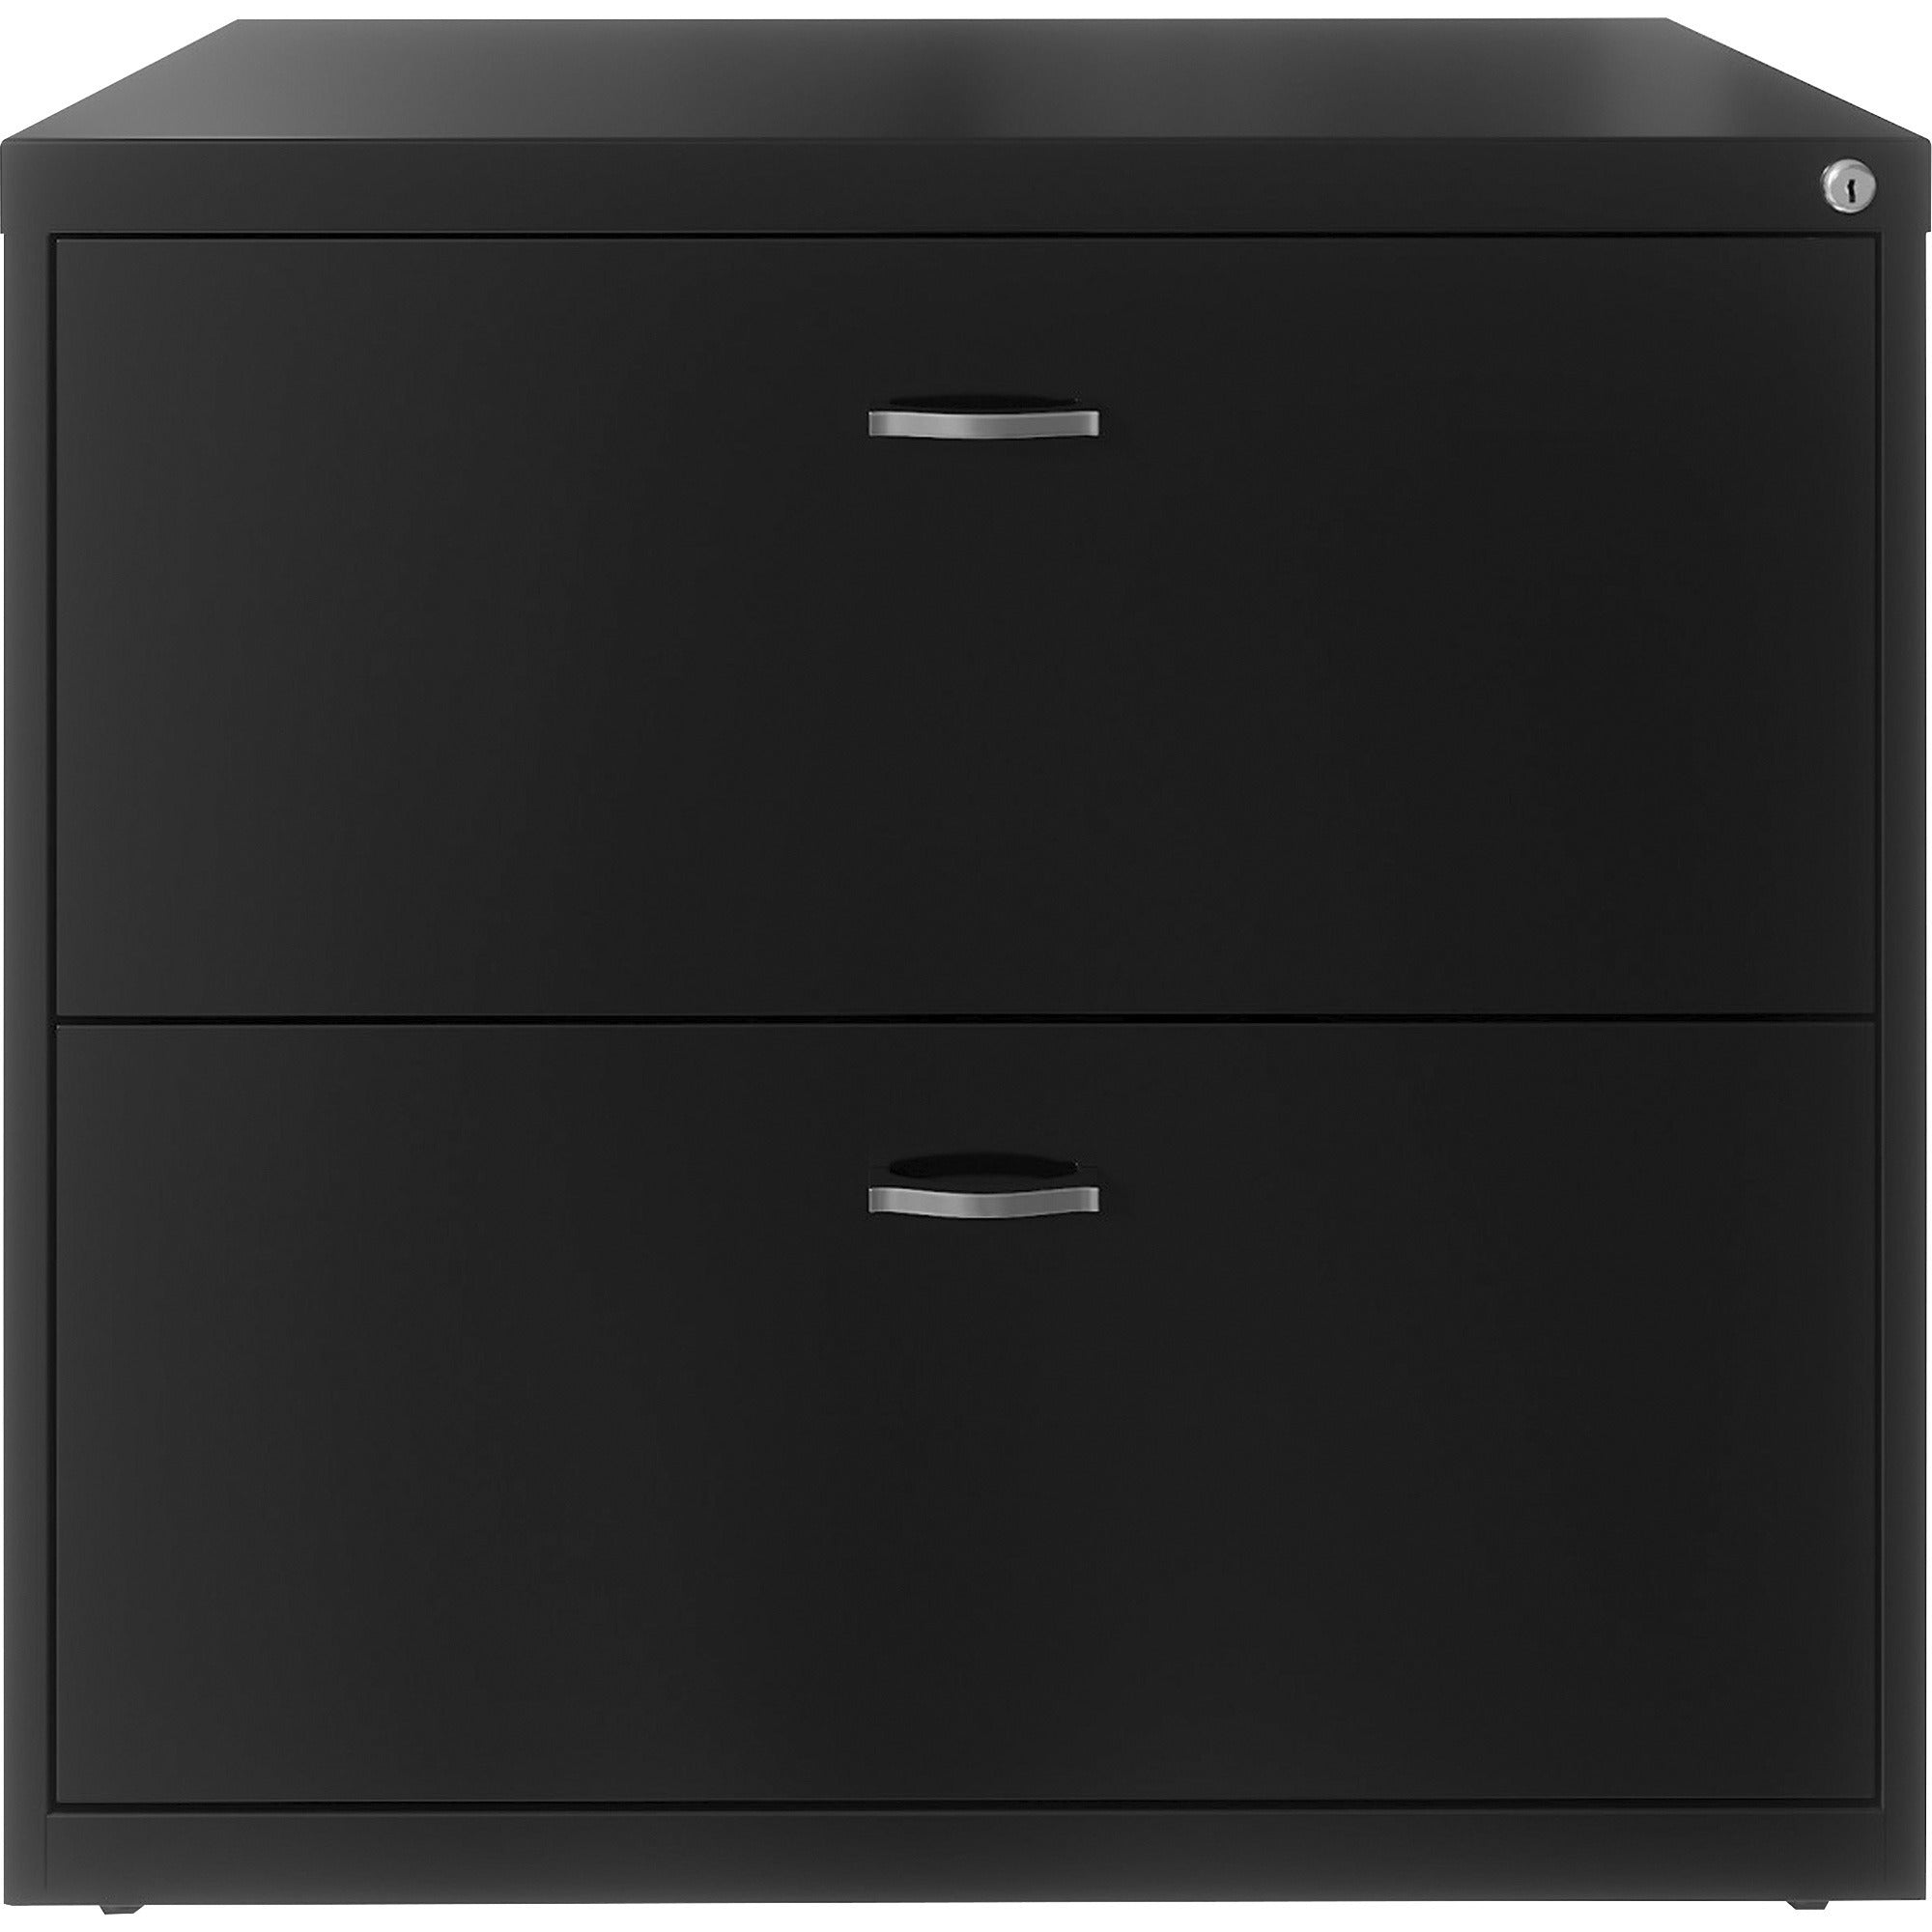 nusparc-2-drawer-lateral-file-30-x-176-x-277-2-x-drawers-for-file-letter-lateral-interlocking-anti-tip-ball-bearing-slide-ball-bearing-suspension-removable-lock-leveling-glide-adjustable-glide-durable-nonporous-surface-blac_nprlf218aabk - 2